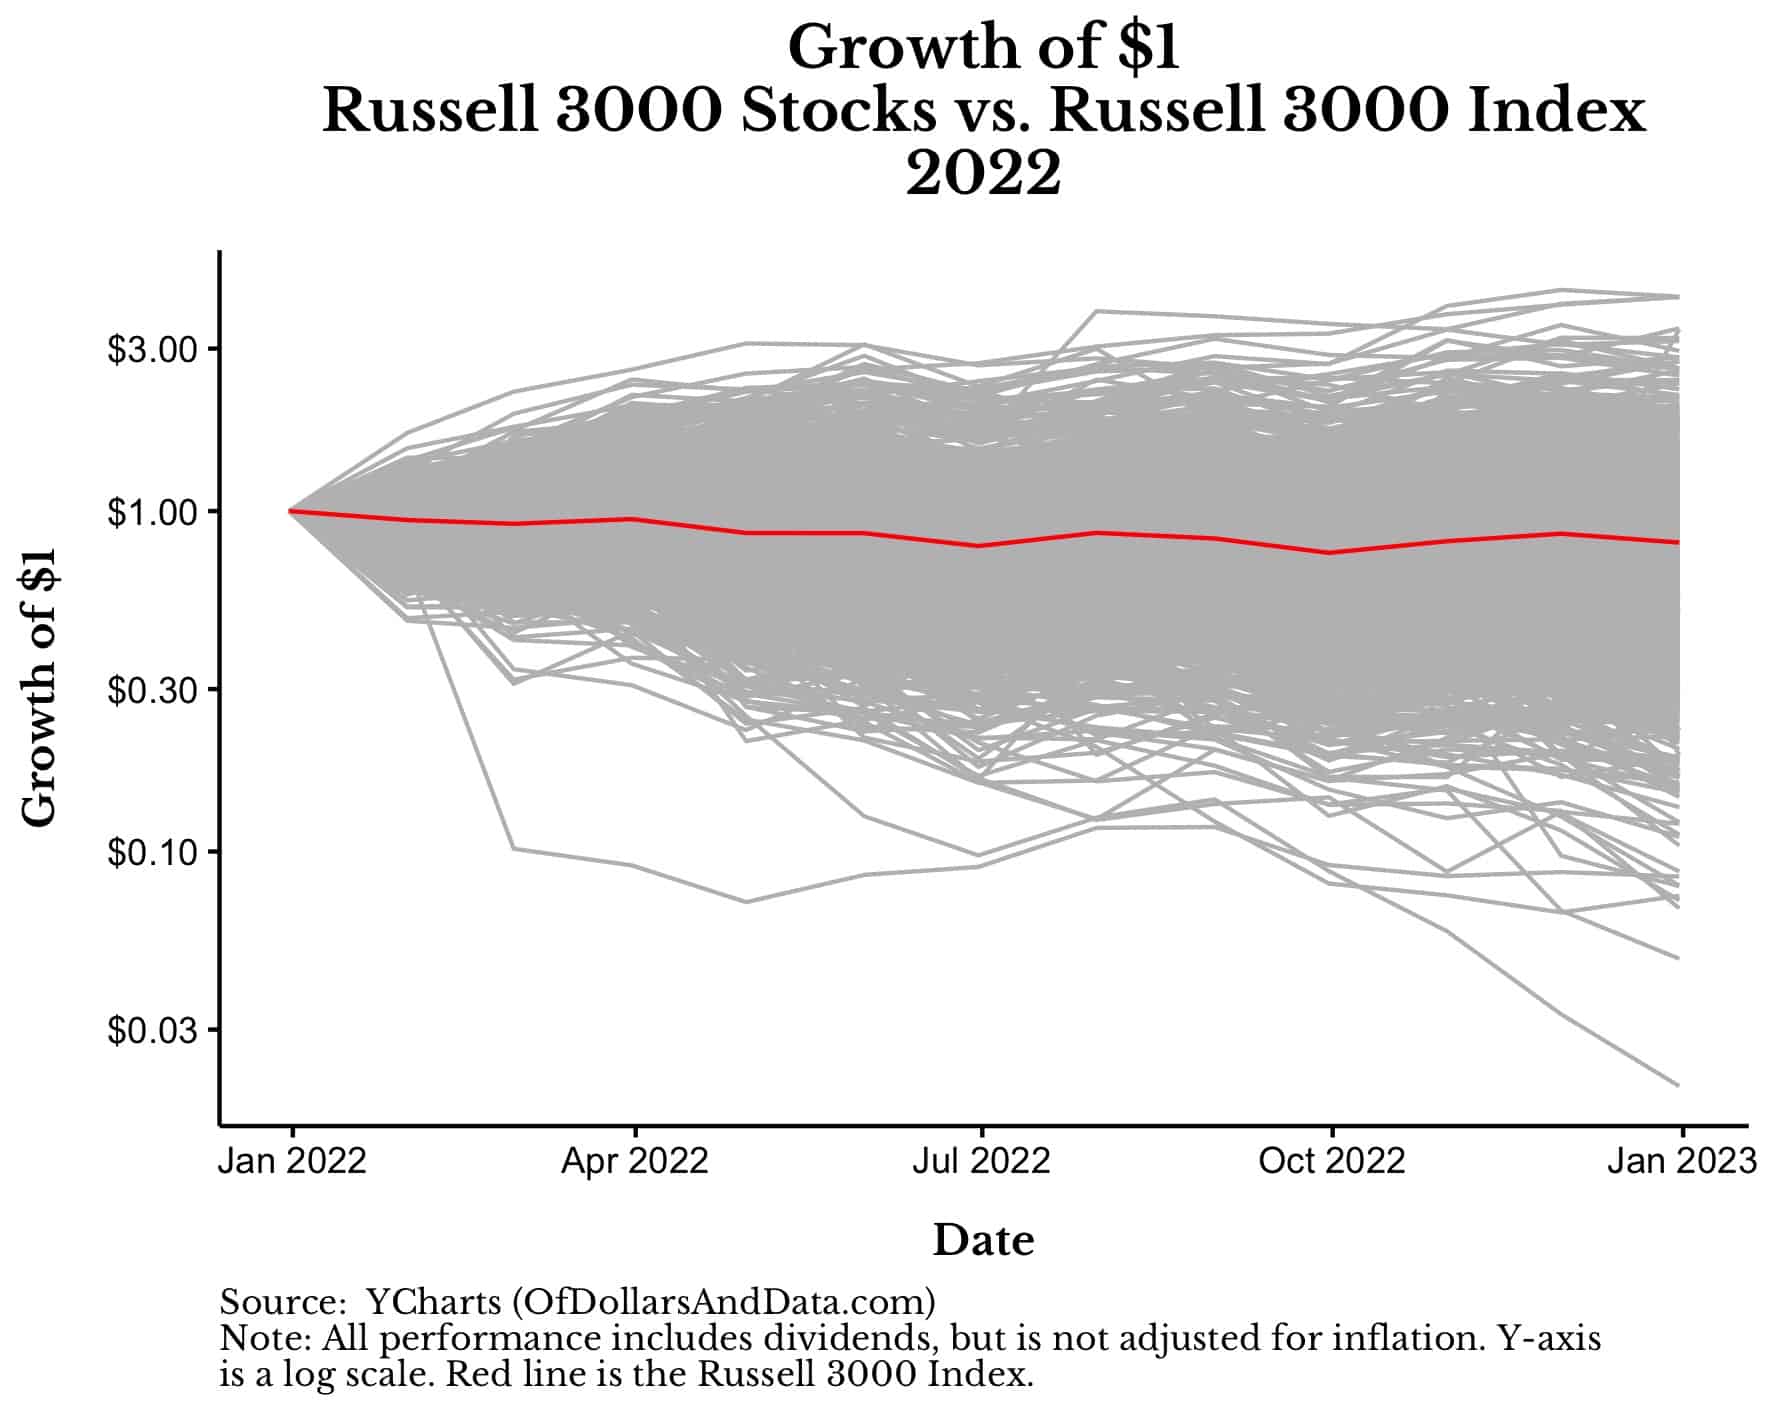 Chart showing growth of $1 for the Russell 3000 index vs its components for 2022.